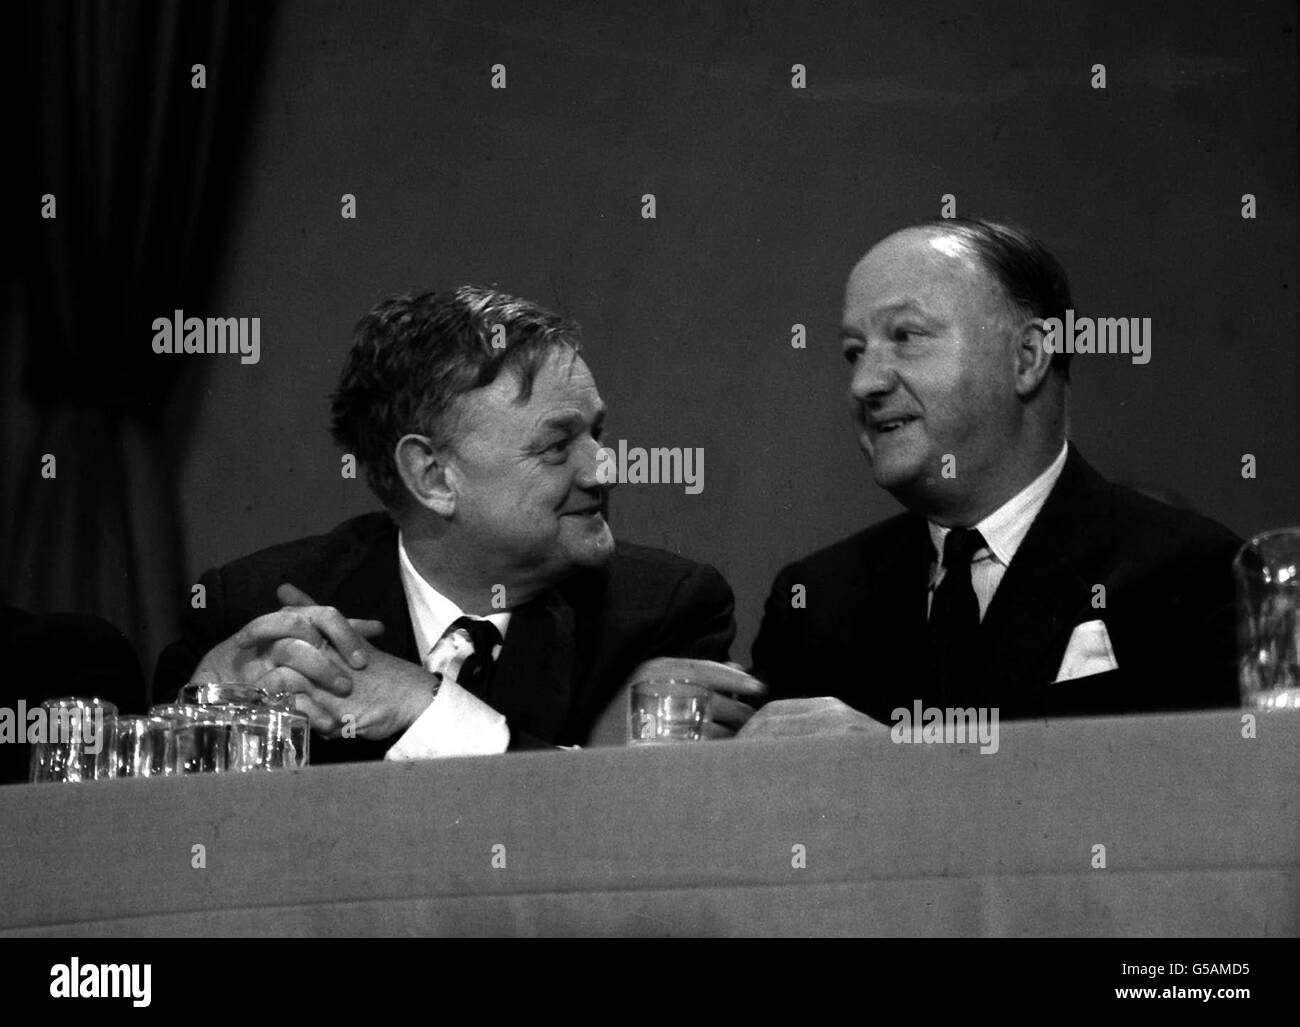 LORD HAILSHAM AND RAB BUTLER : 1963 Stock Photo